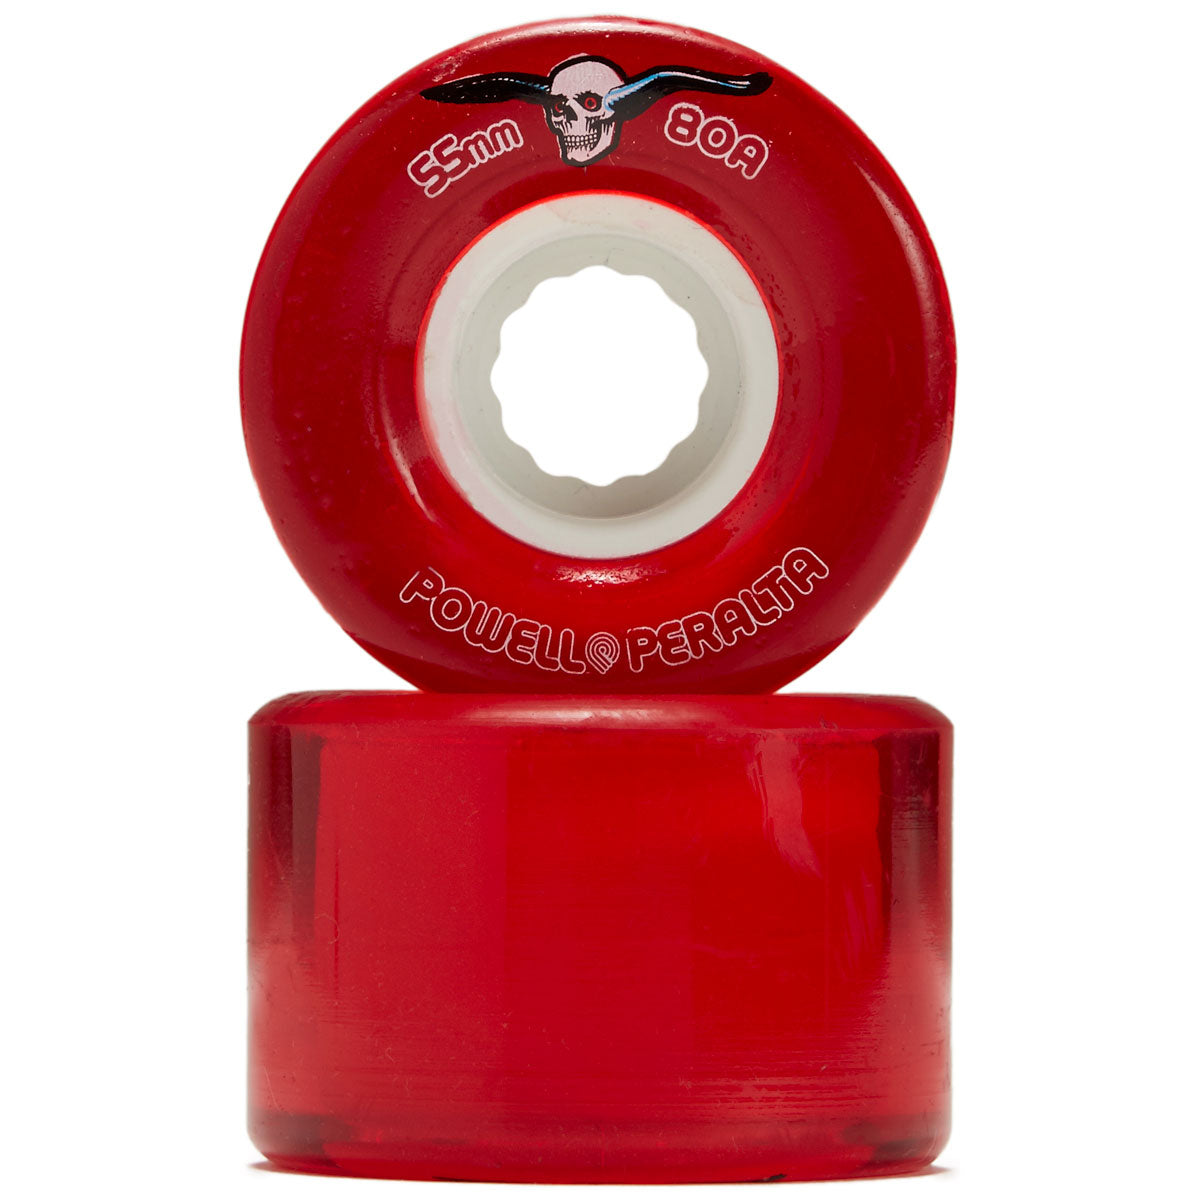 Powell-Peralta Clear Cruisers 80A Skateboard Wheels - Red - 55mm image 2